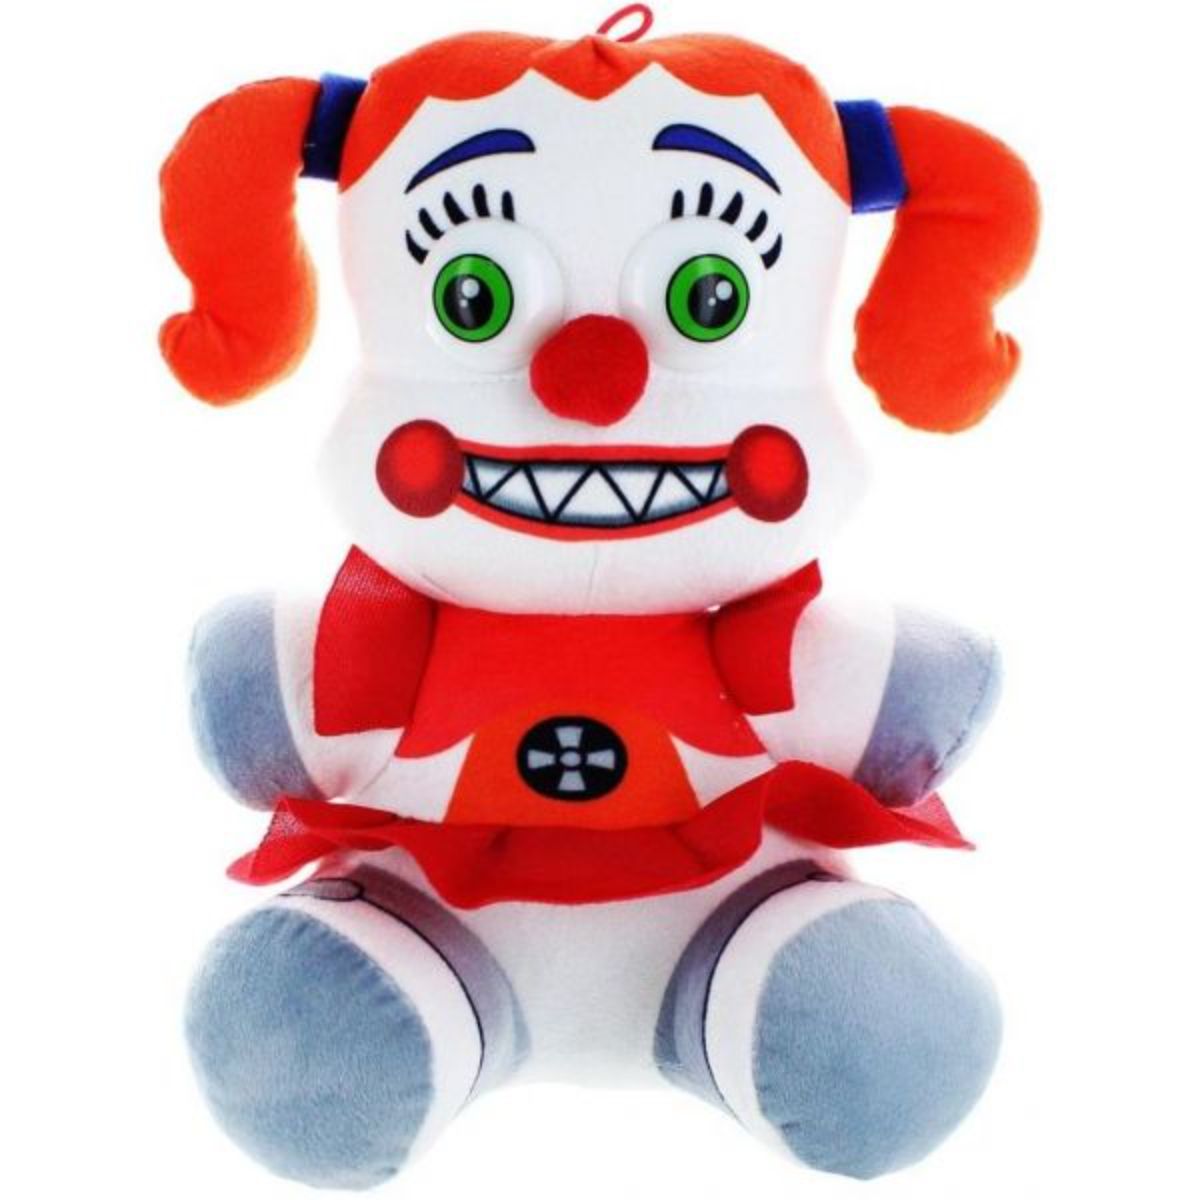 Jucarie de plus, Whitehouse Leisure, Circus Baby, Five Nights at Freddy’s, 26 cm Jucarii plus 2023-09-25